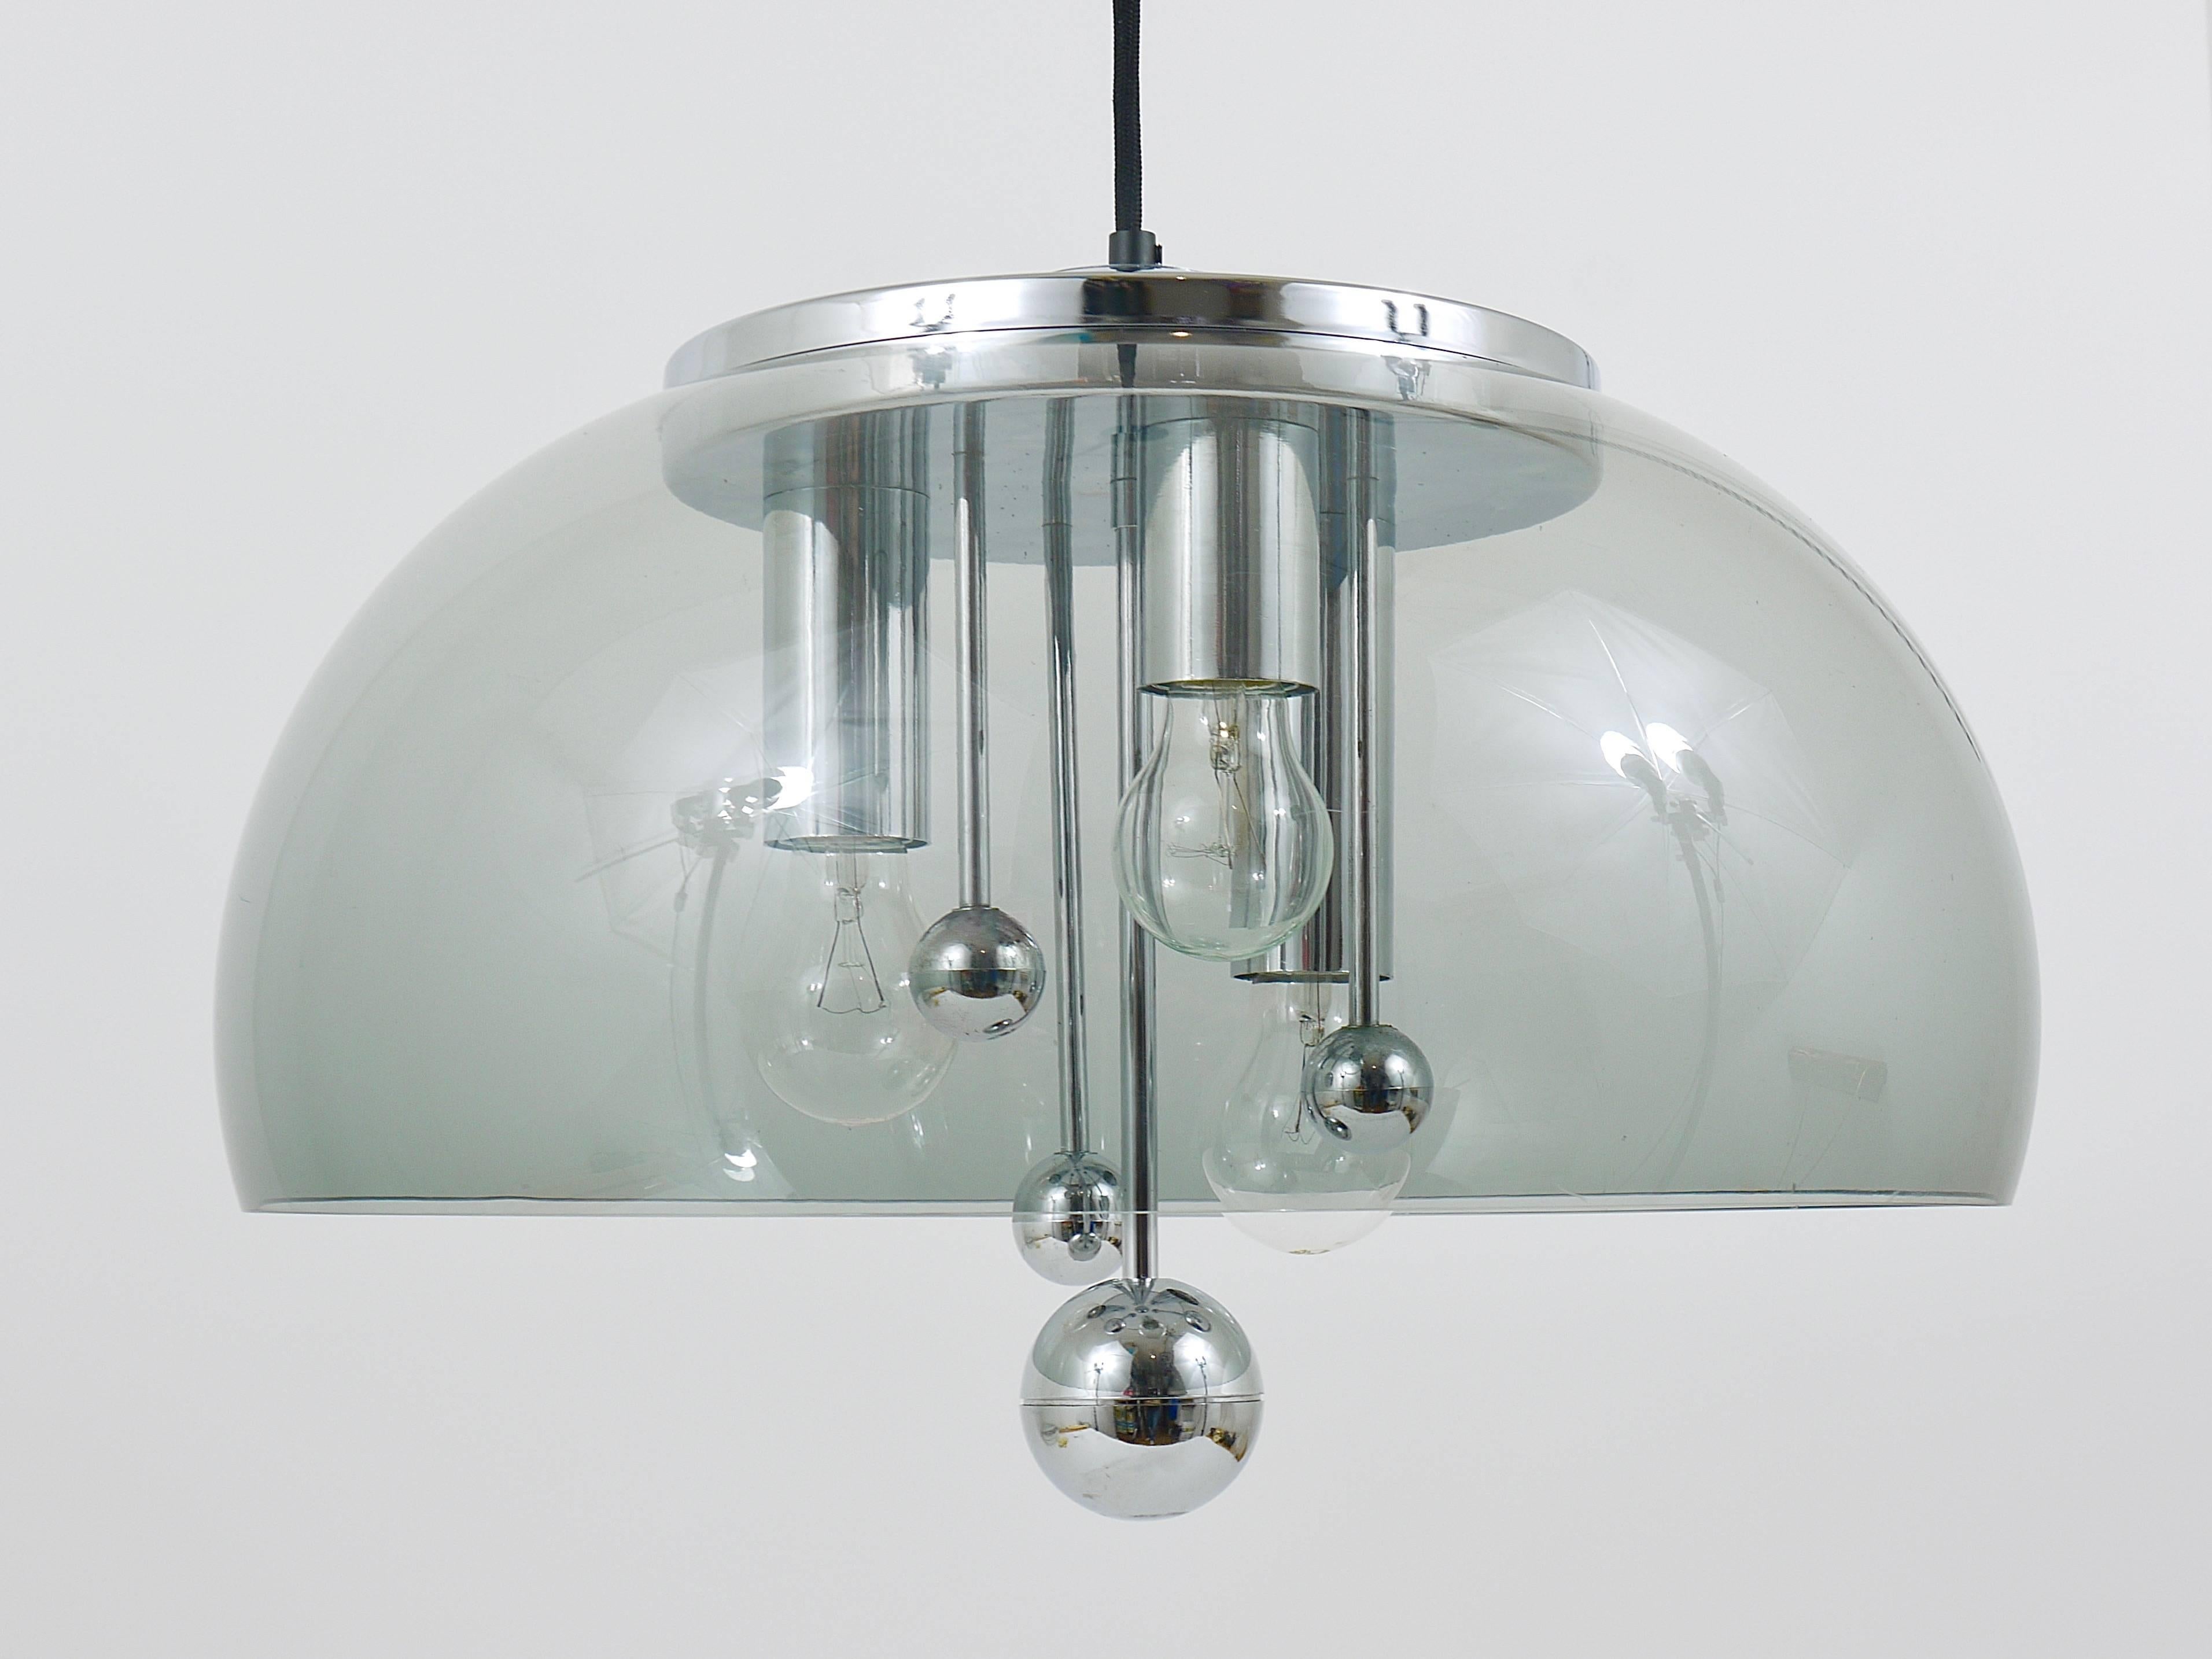 20th Century Midcentury Space Age Globe Pendant Lamp with Chromed Spheres, Germany, 1970s For Sale